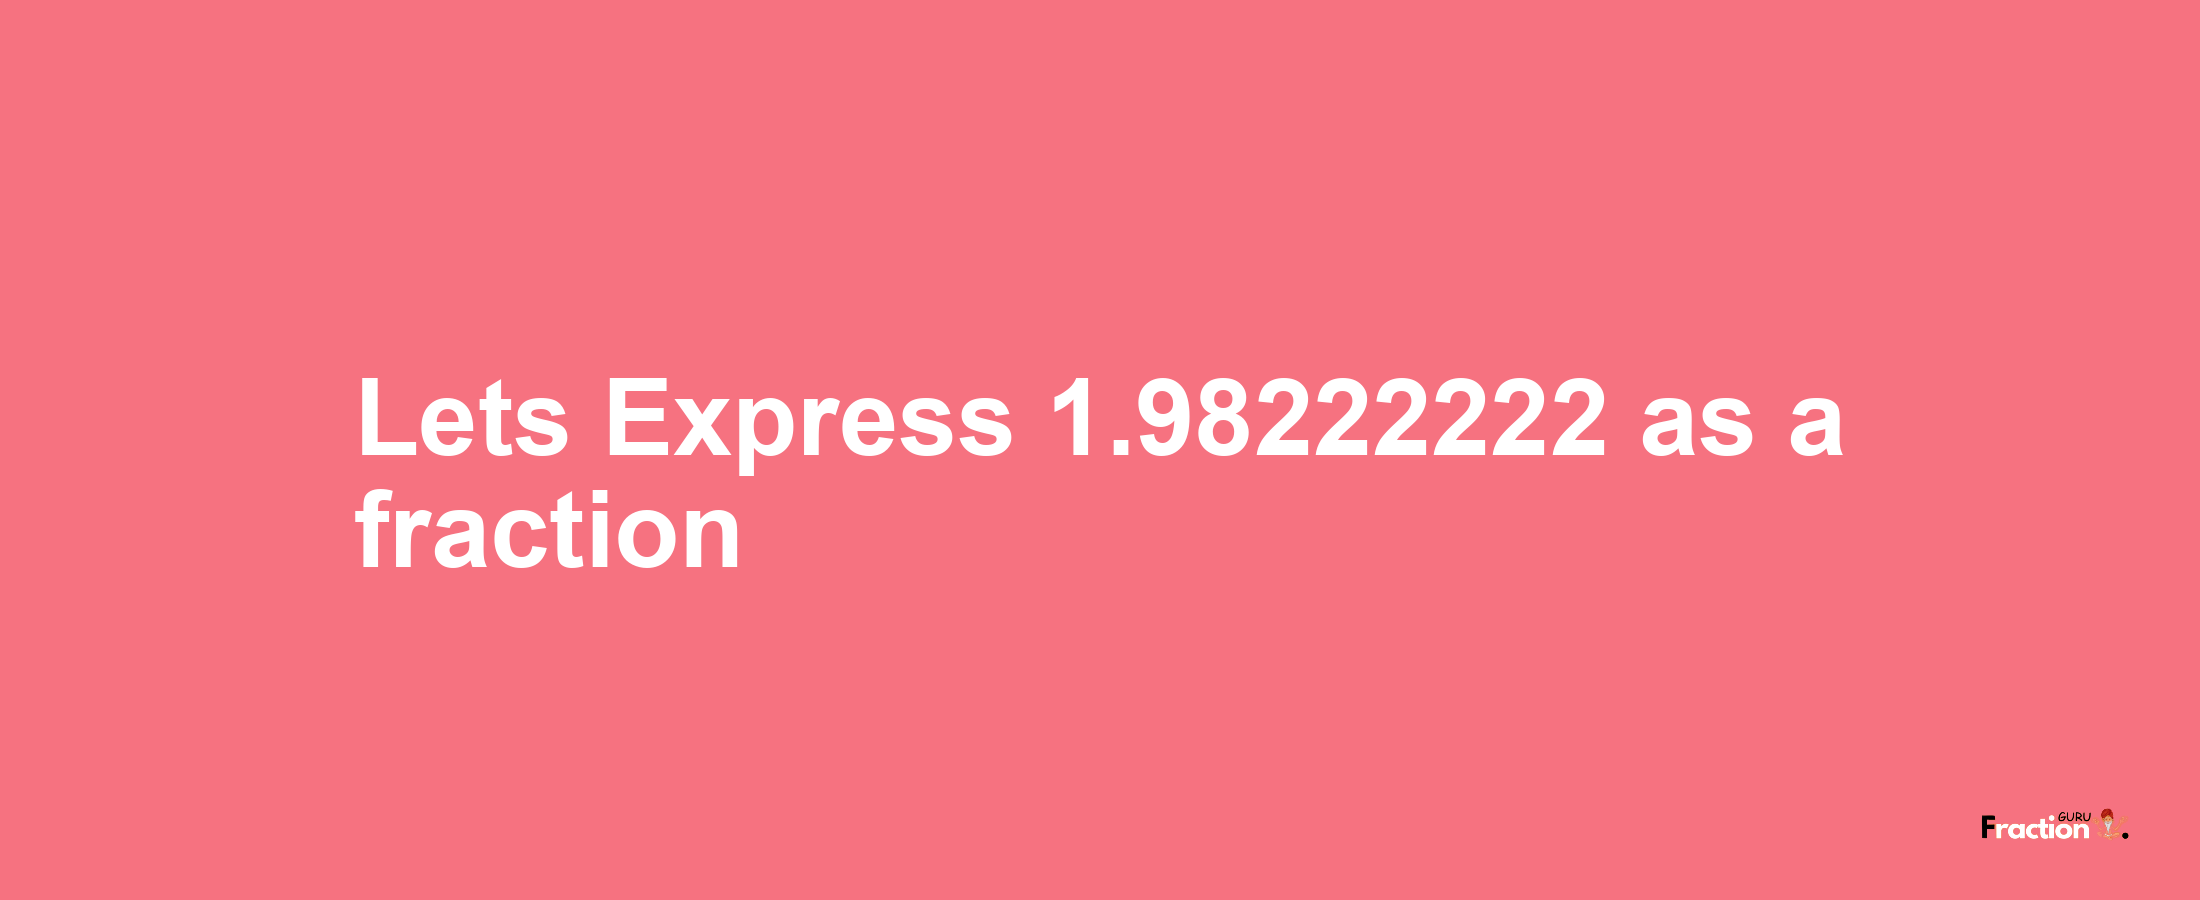 Lets Express 1.98222222 as afraction